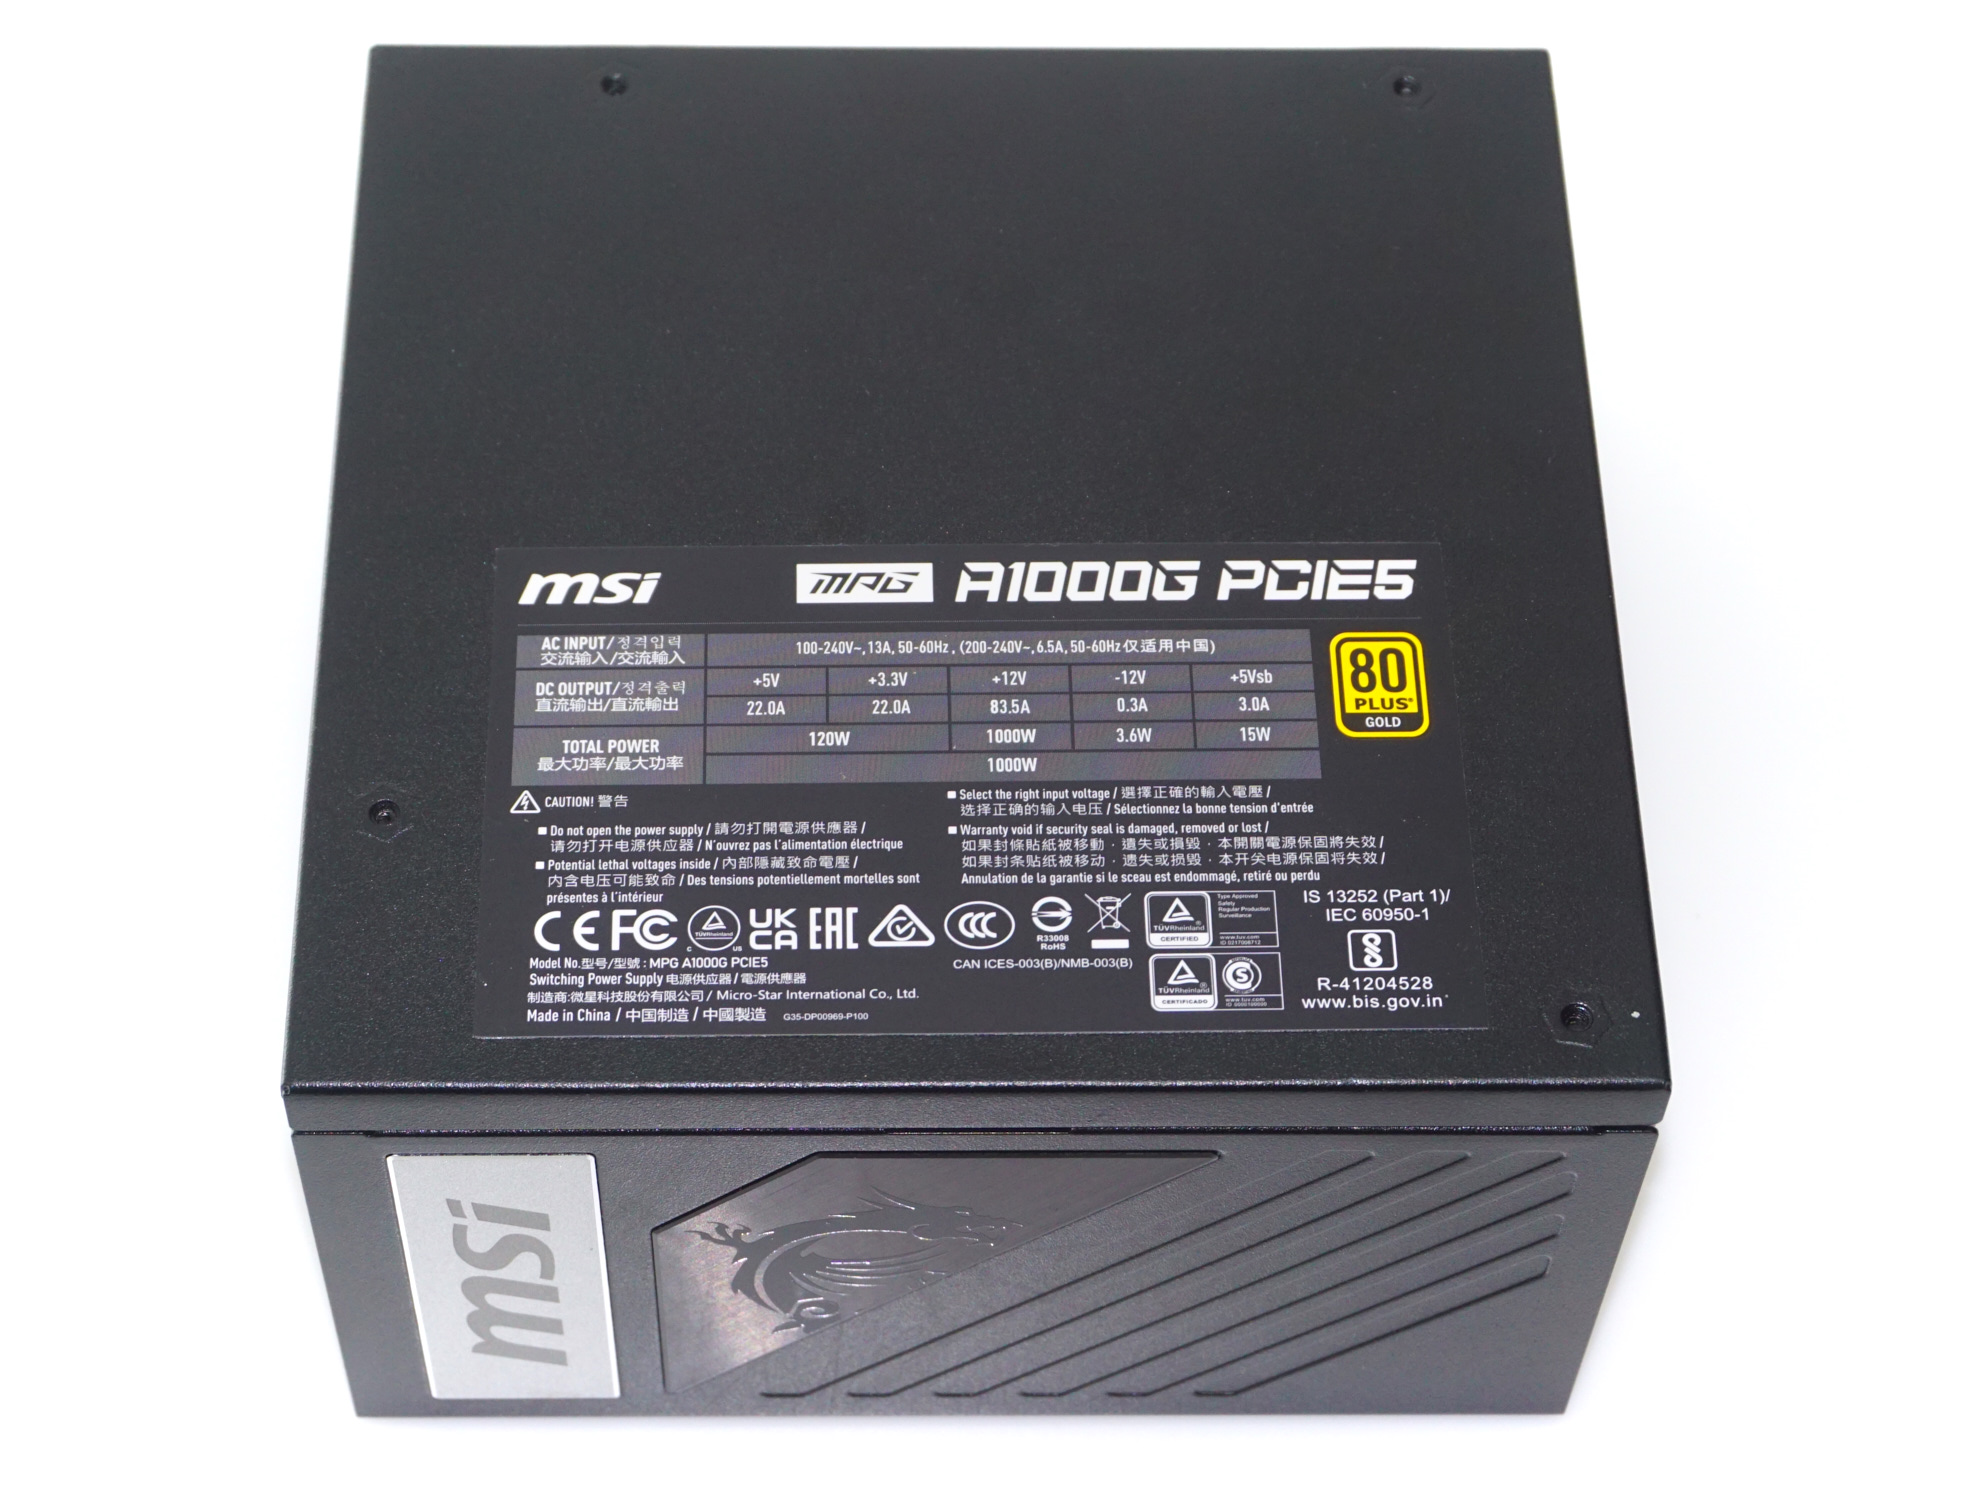 MSI MPG A1000G PCIE5 Power Supply Preview - ATX 3.0, PCIe 5.0, and 80 Plus  Gold Certified PSU